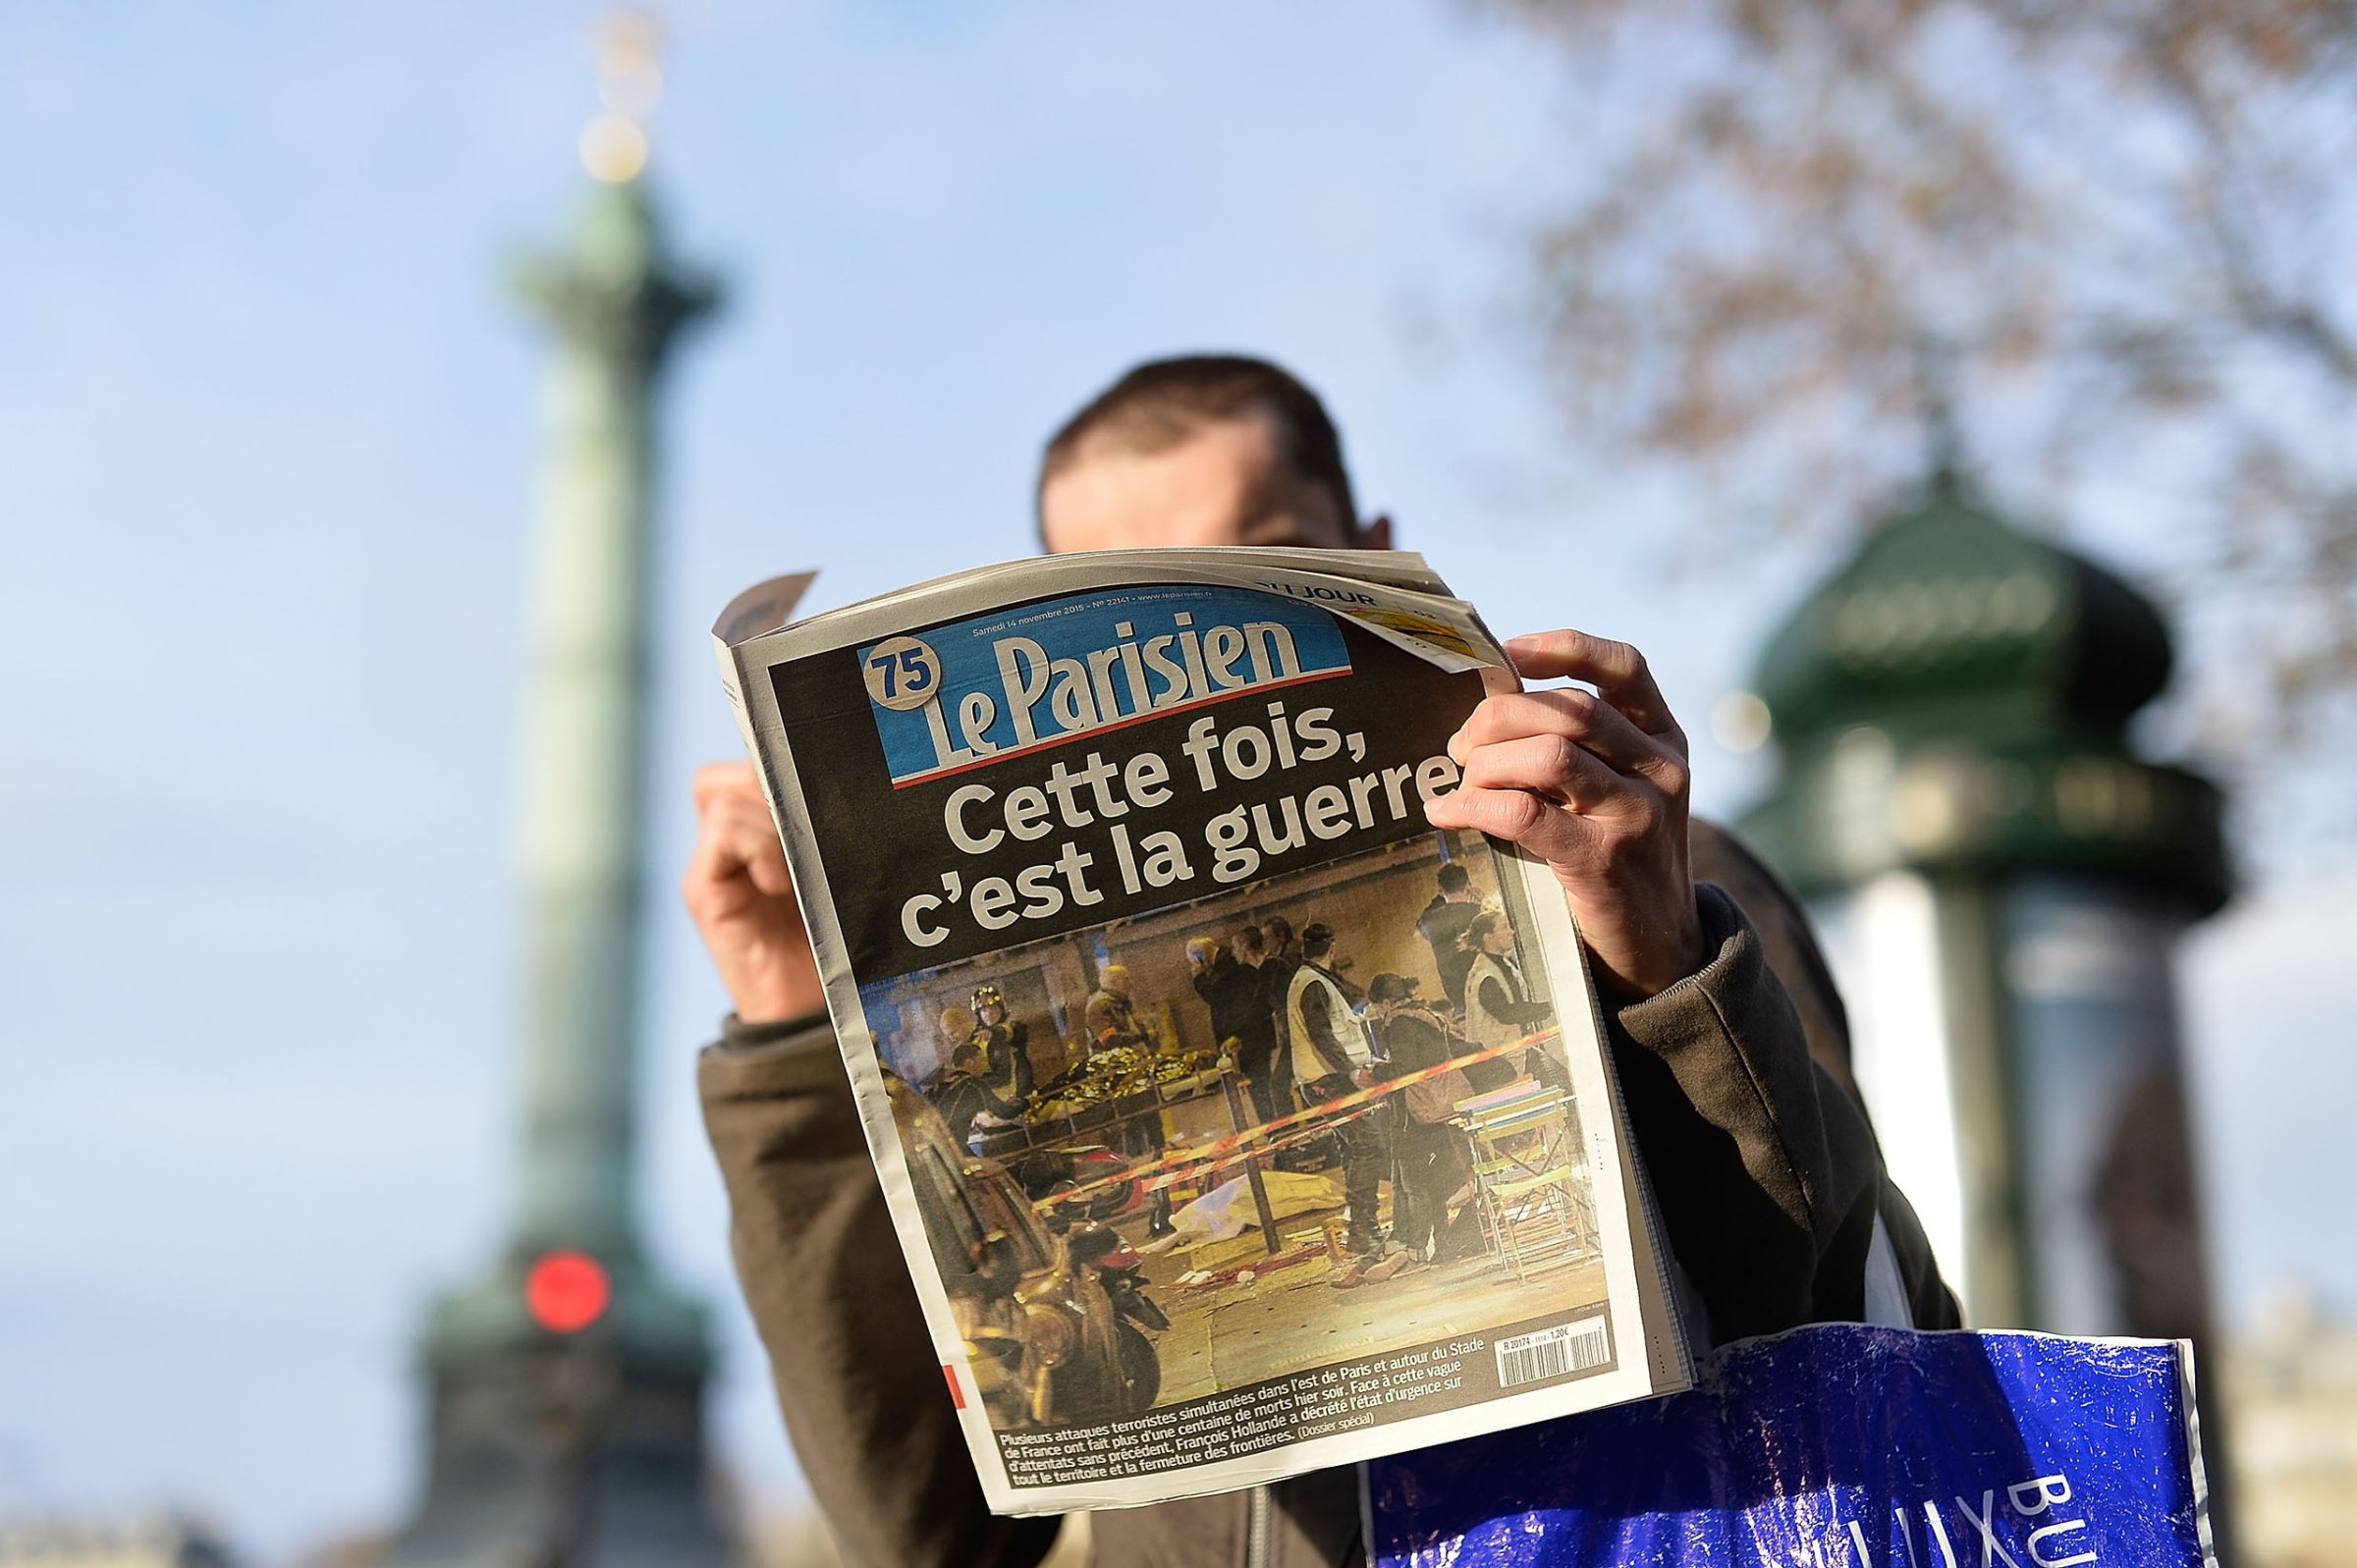 A man reads a French newspaper after a terrorist attack in Paris on Nov. 14, 2015.